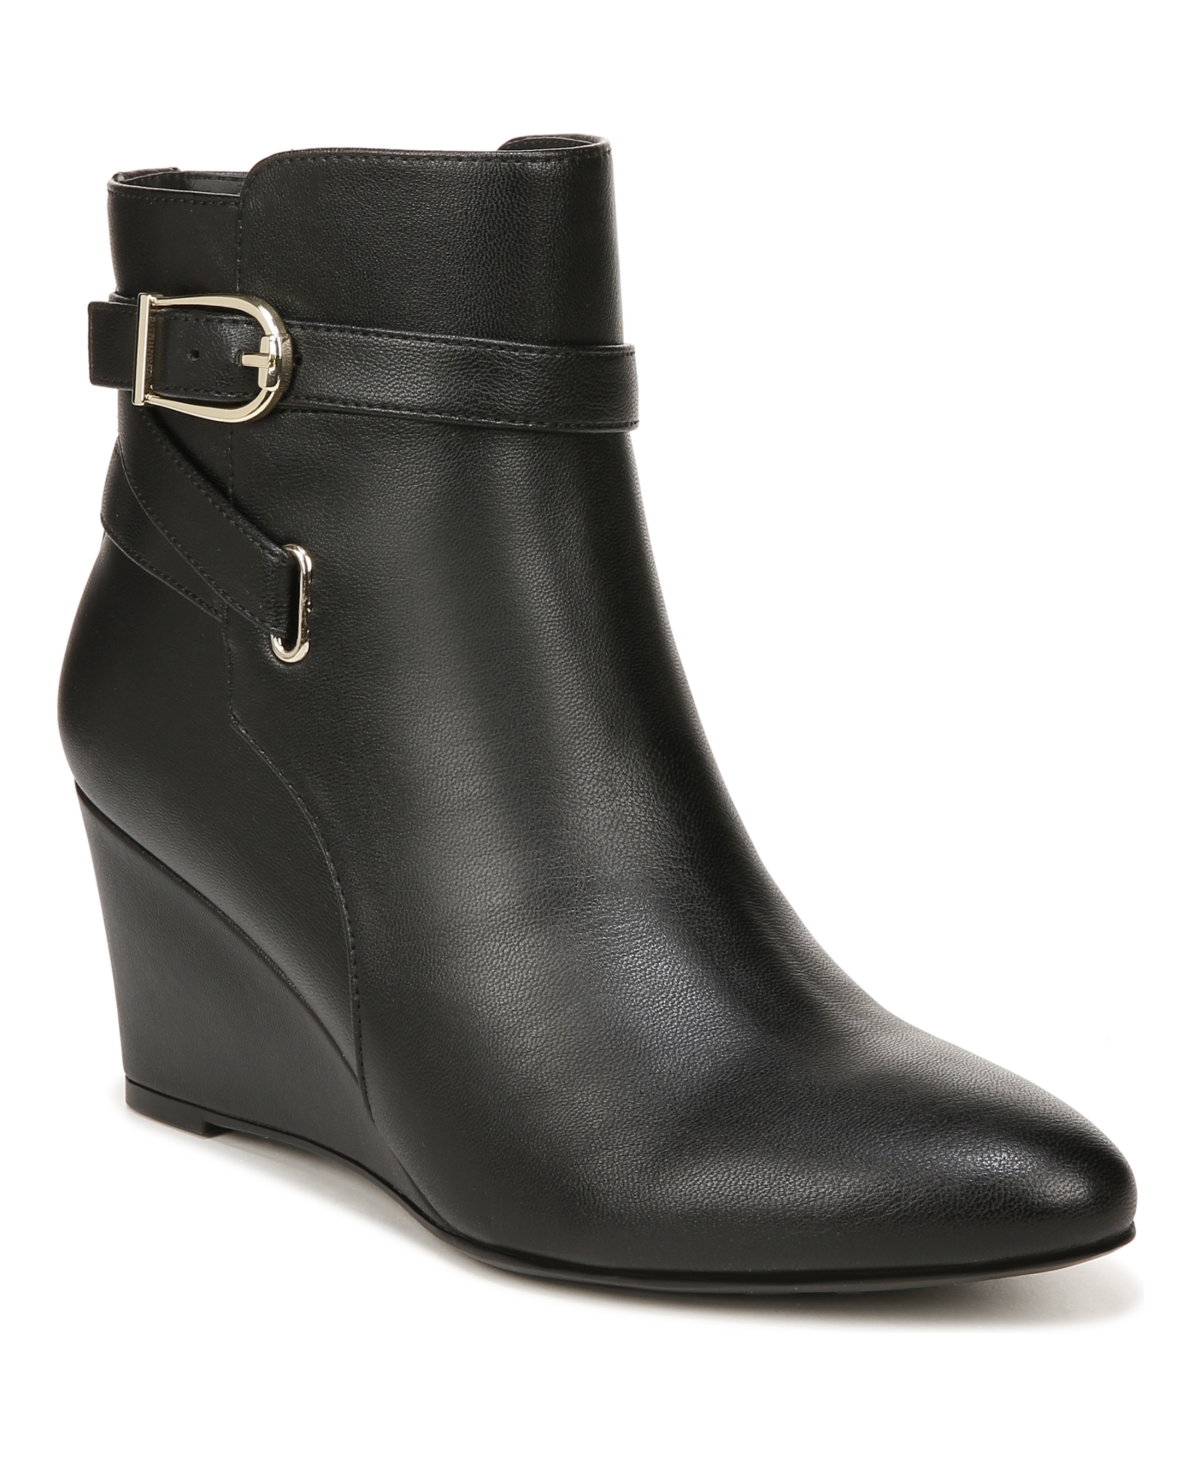 Gio Boot Booties - Black Faux Leather